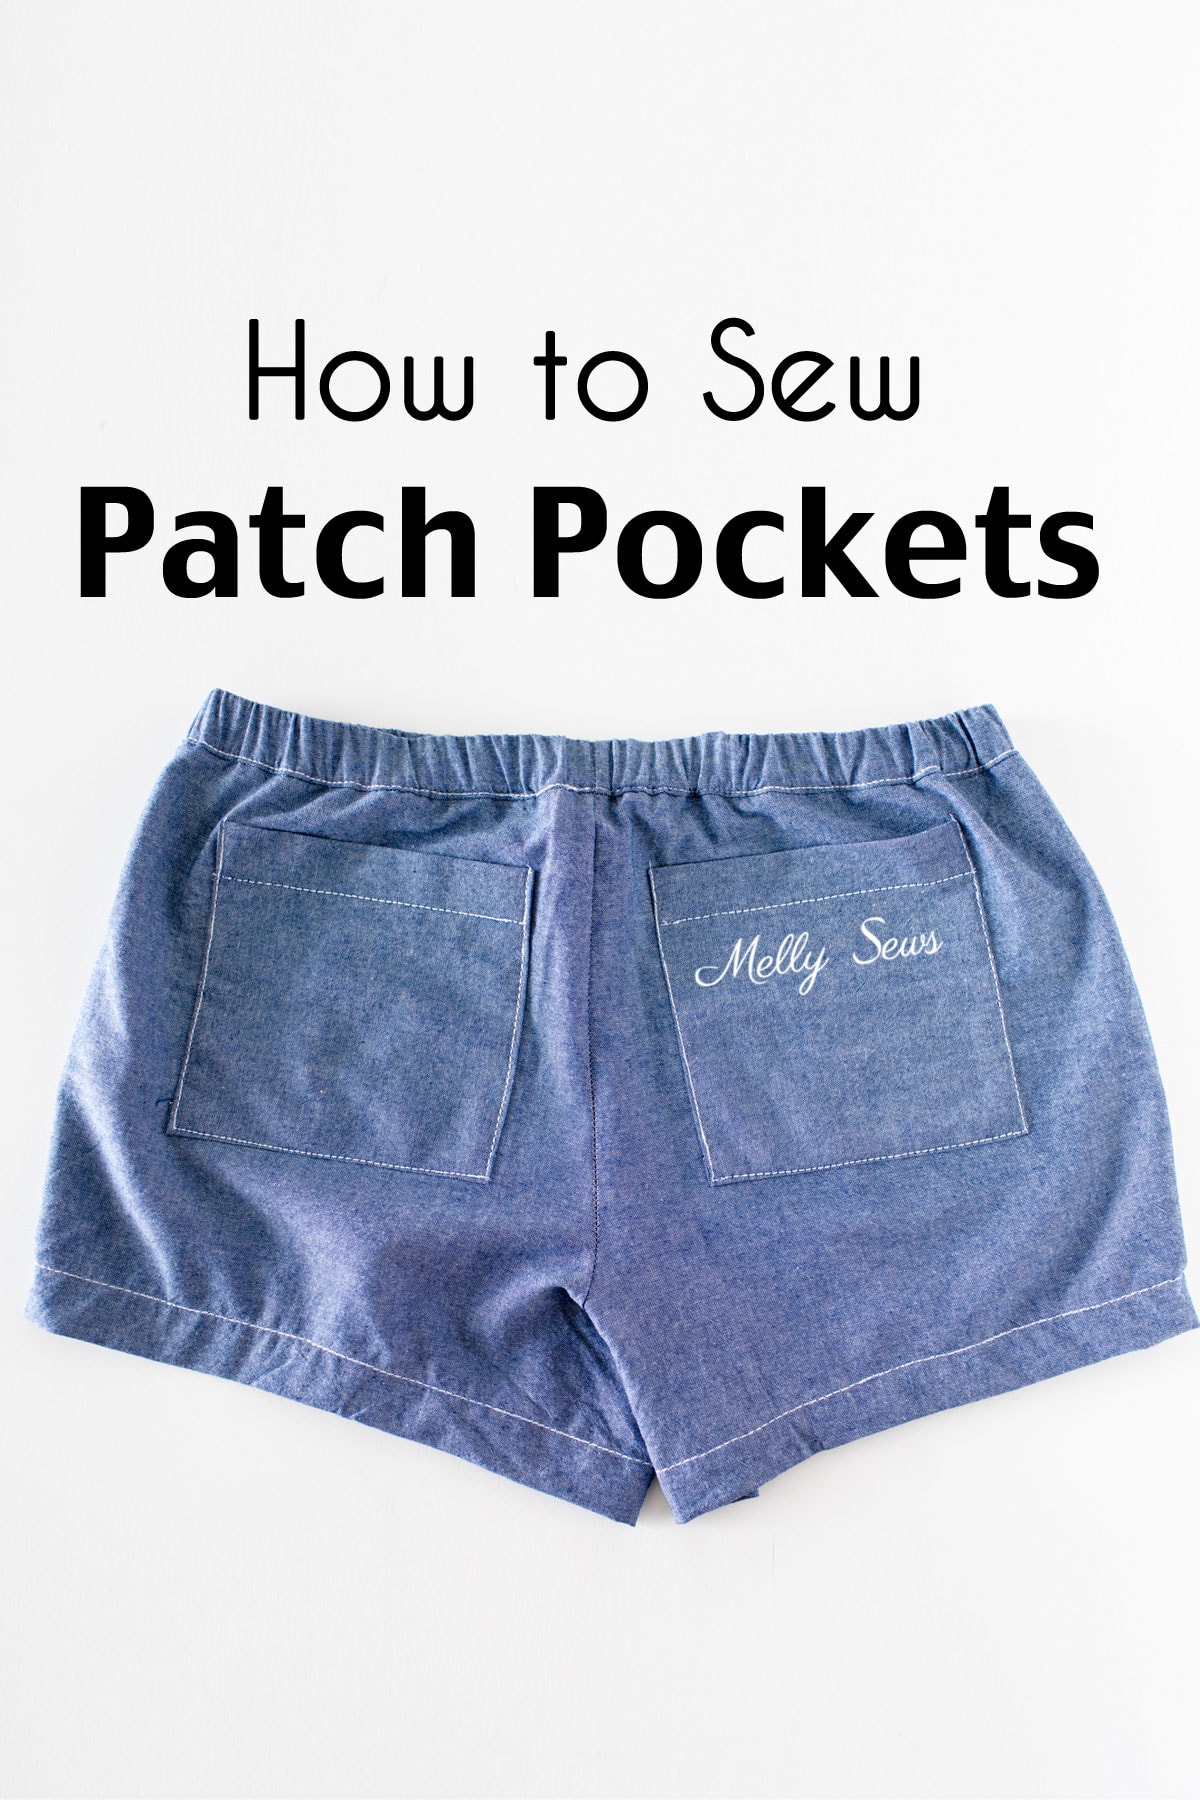 How to Sew Patch Pockets - Melly Sews